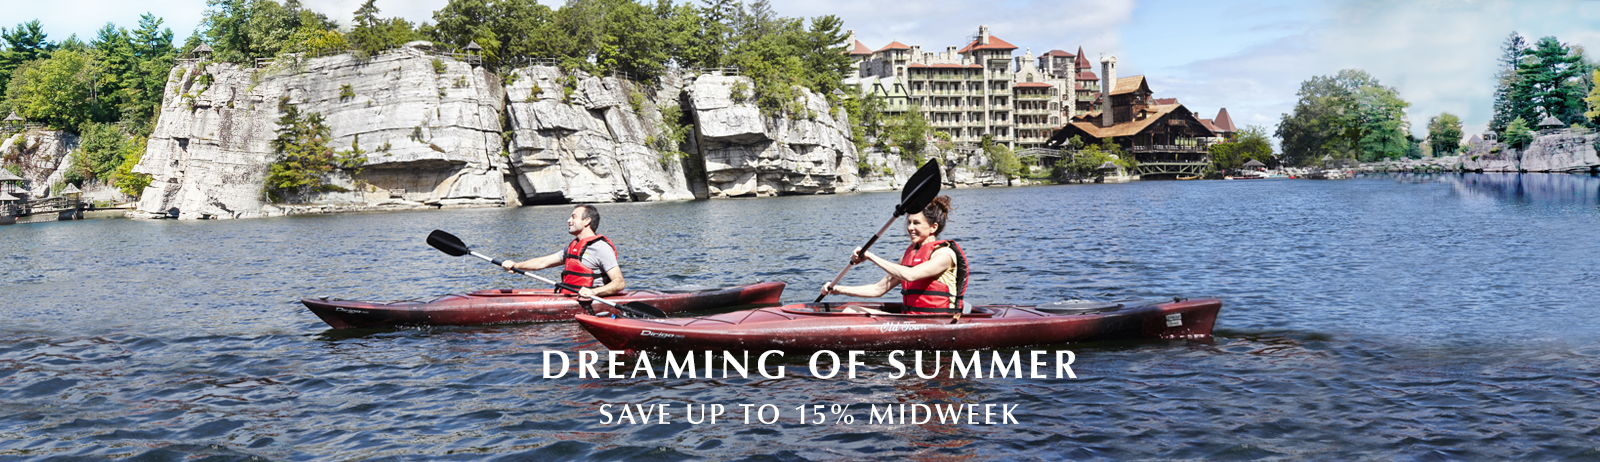 Dreaming of Summer Sale at Mohonk Mountain House